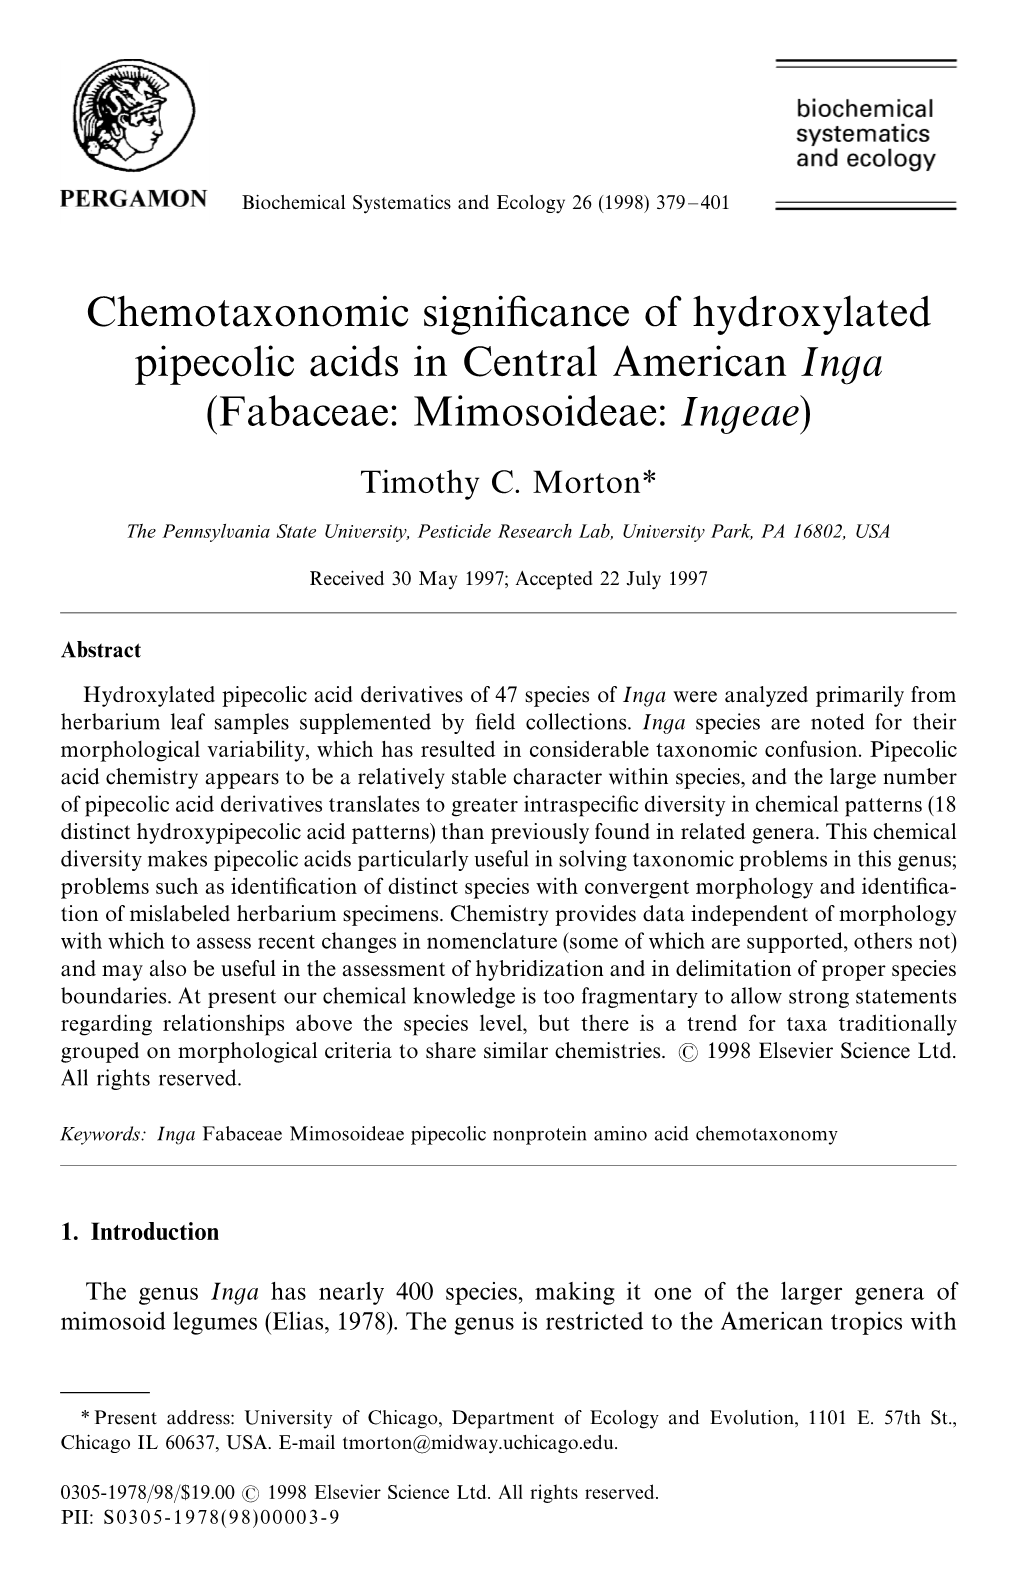 Chemotaxonomic Significance of Hydroxylated